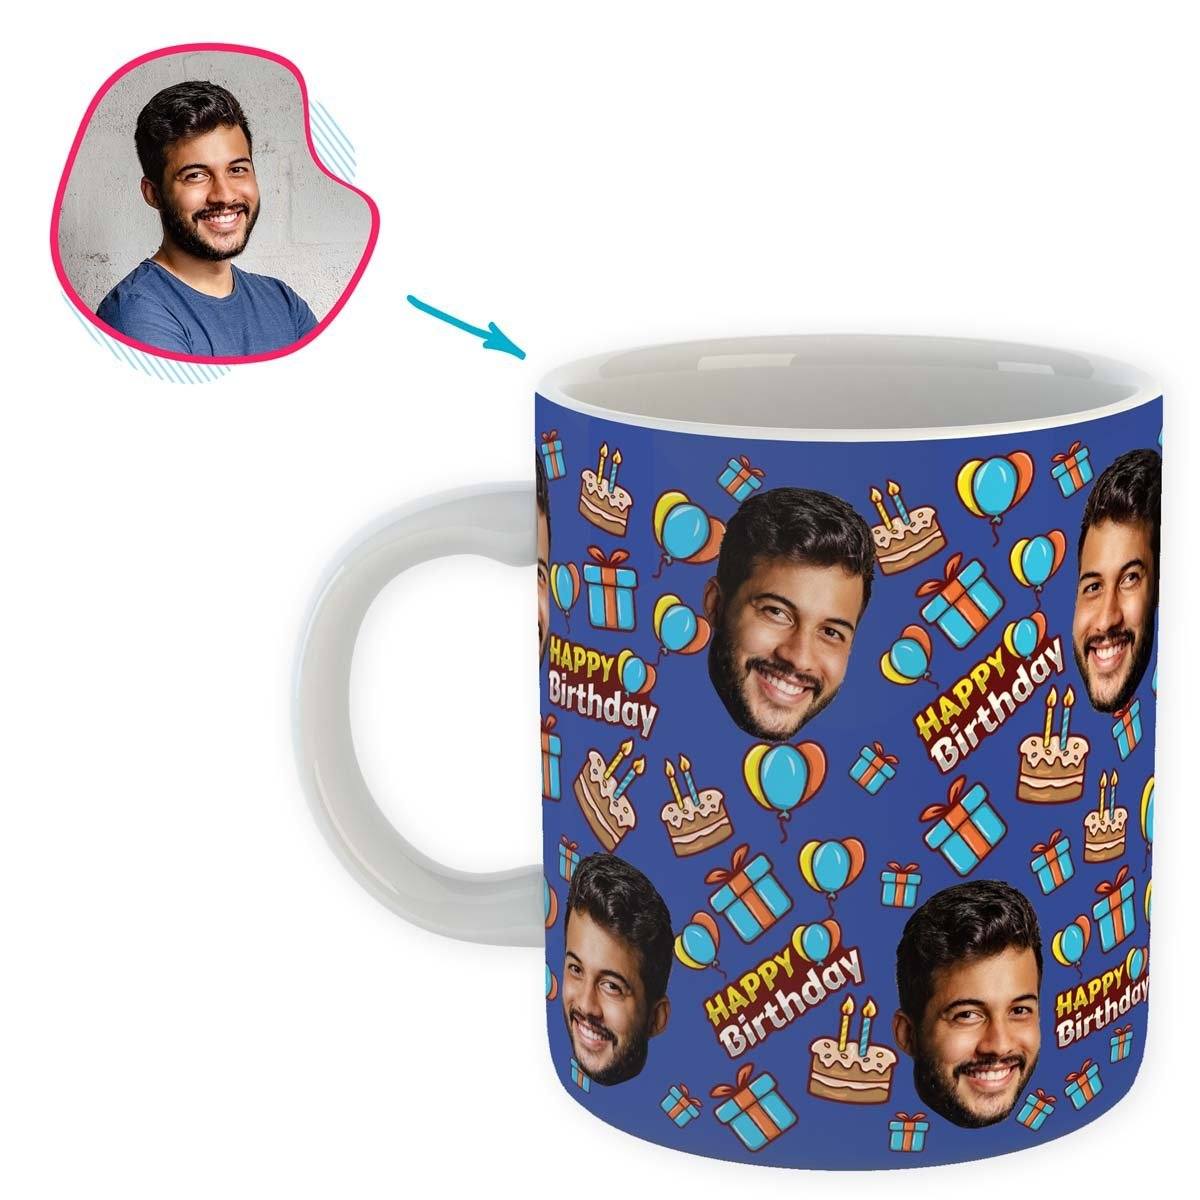 darkblue Birthday mug personalized with photo of face printed on it